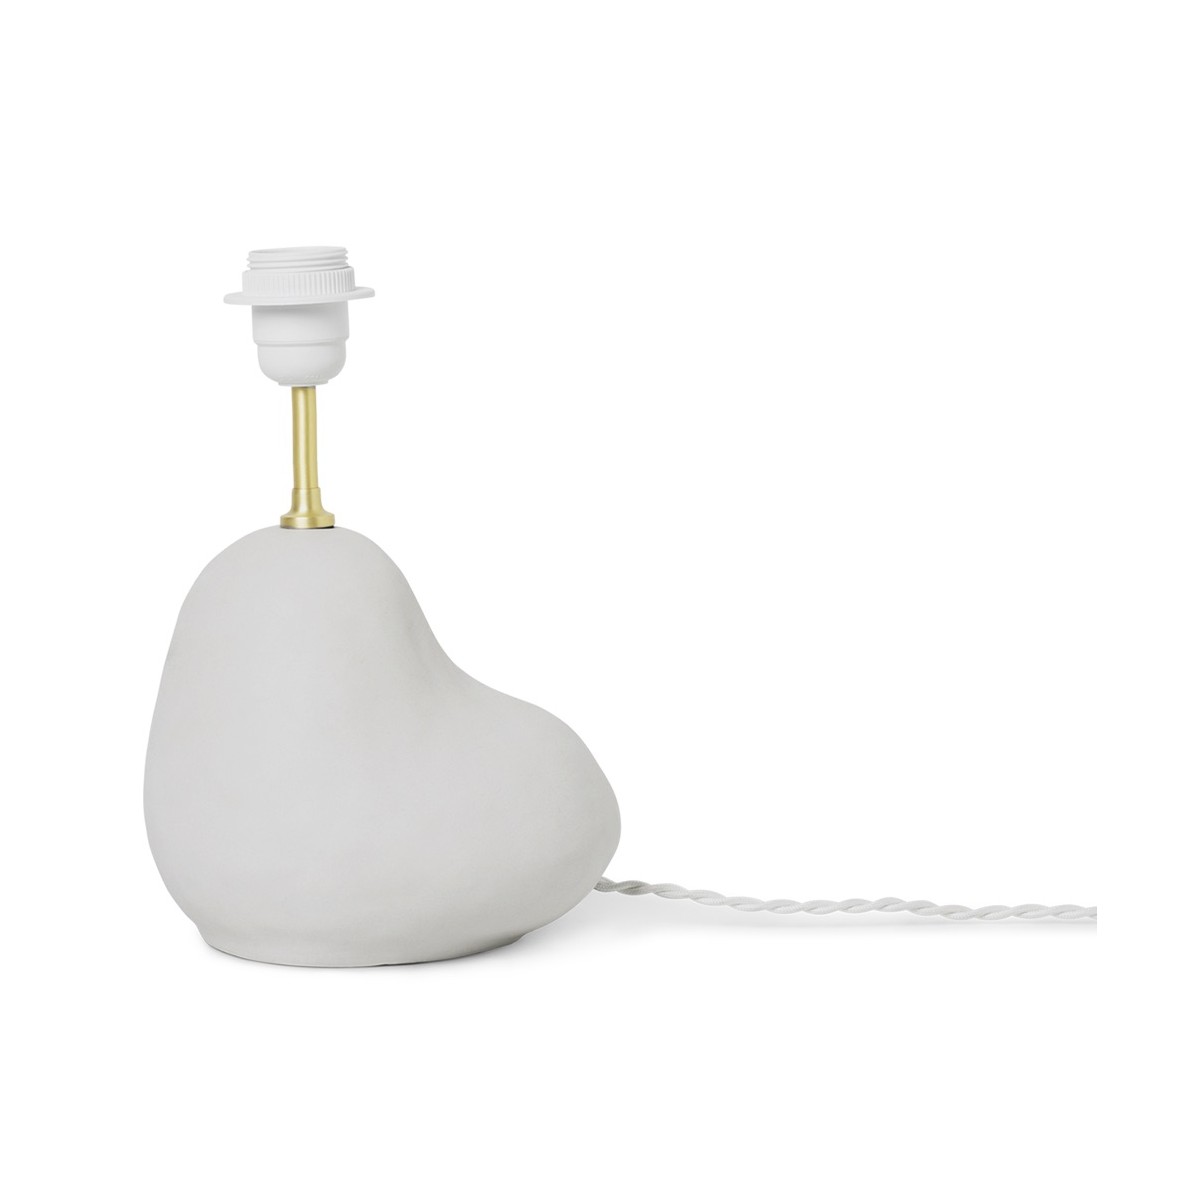 Hebe lamp - small off-white base